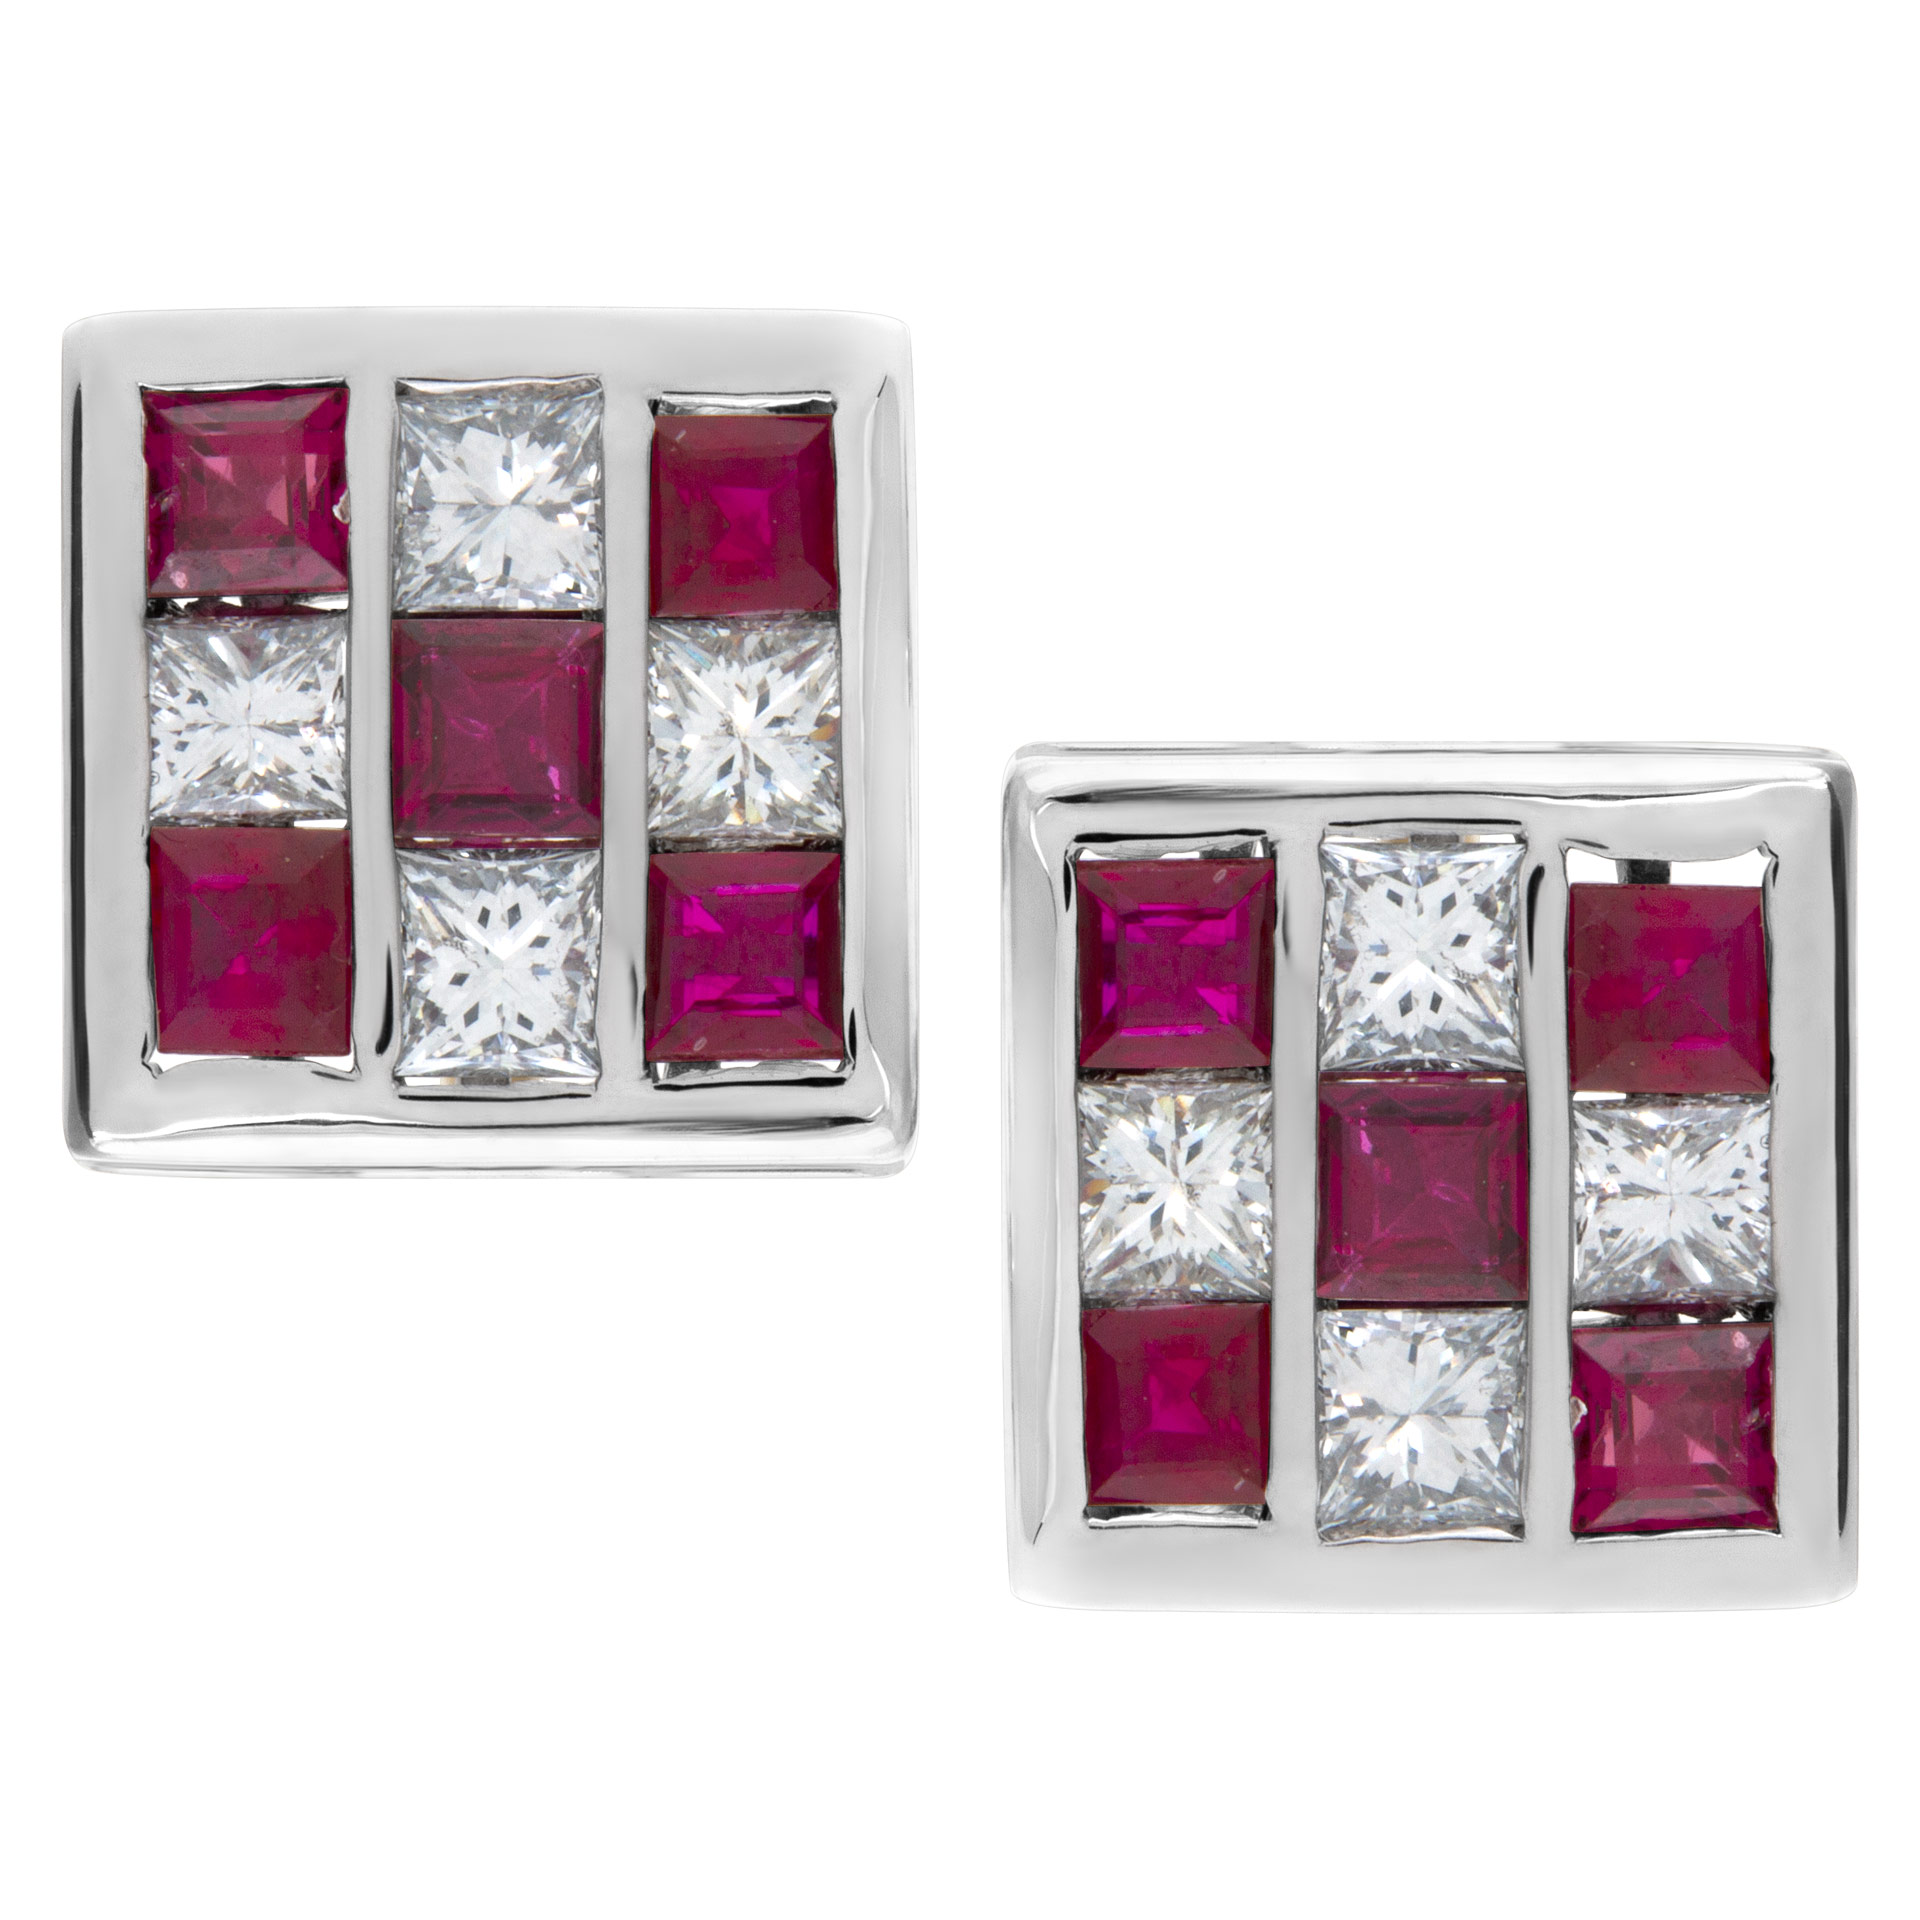 Cufflinks with ruby and princess cut diamonds in 18k white and yellow gold